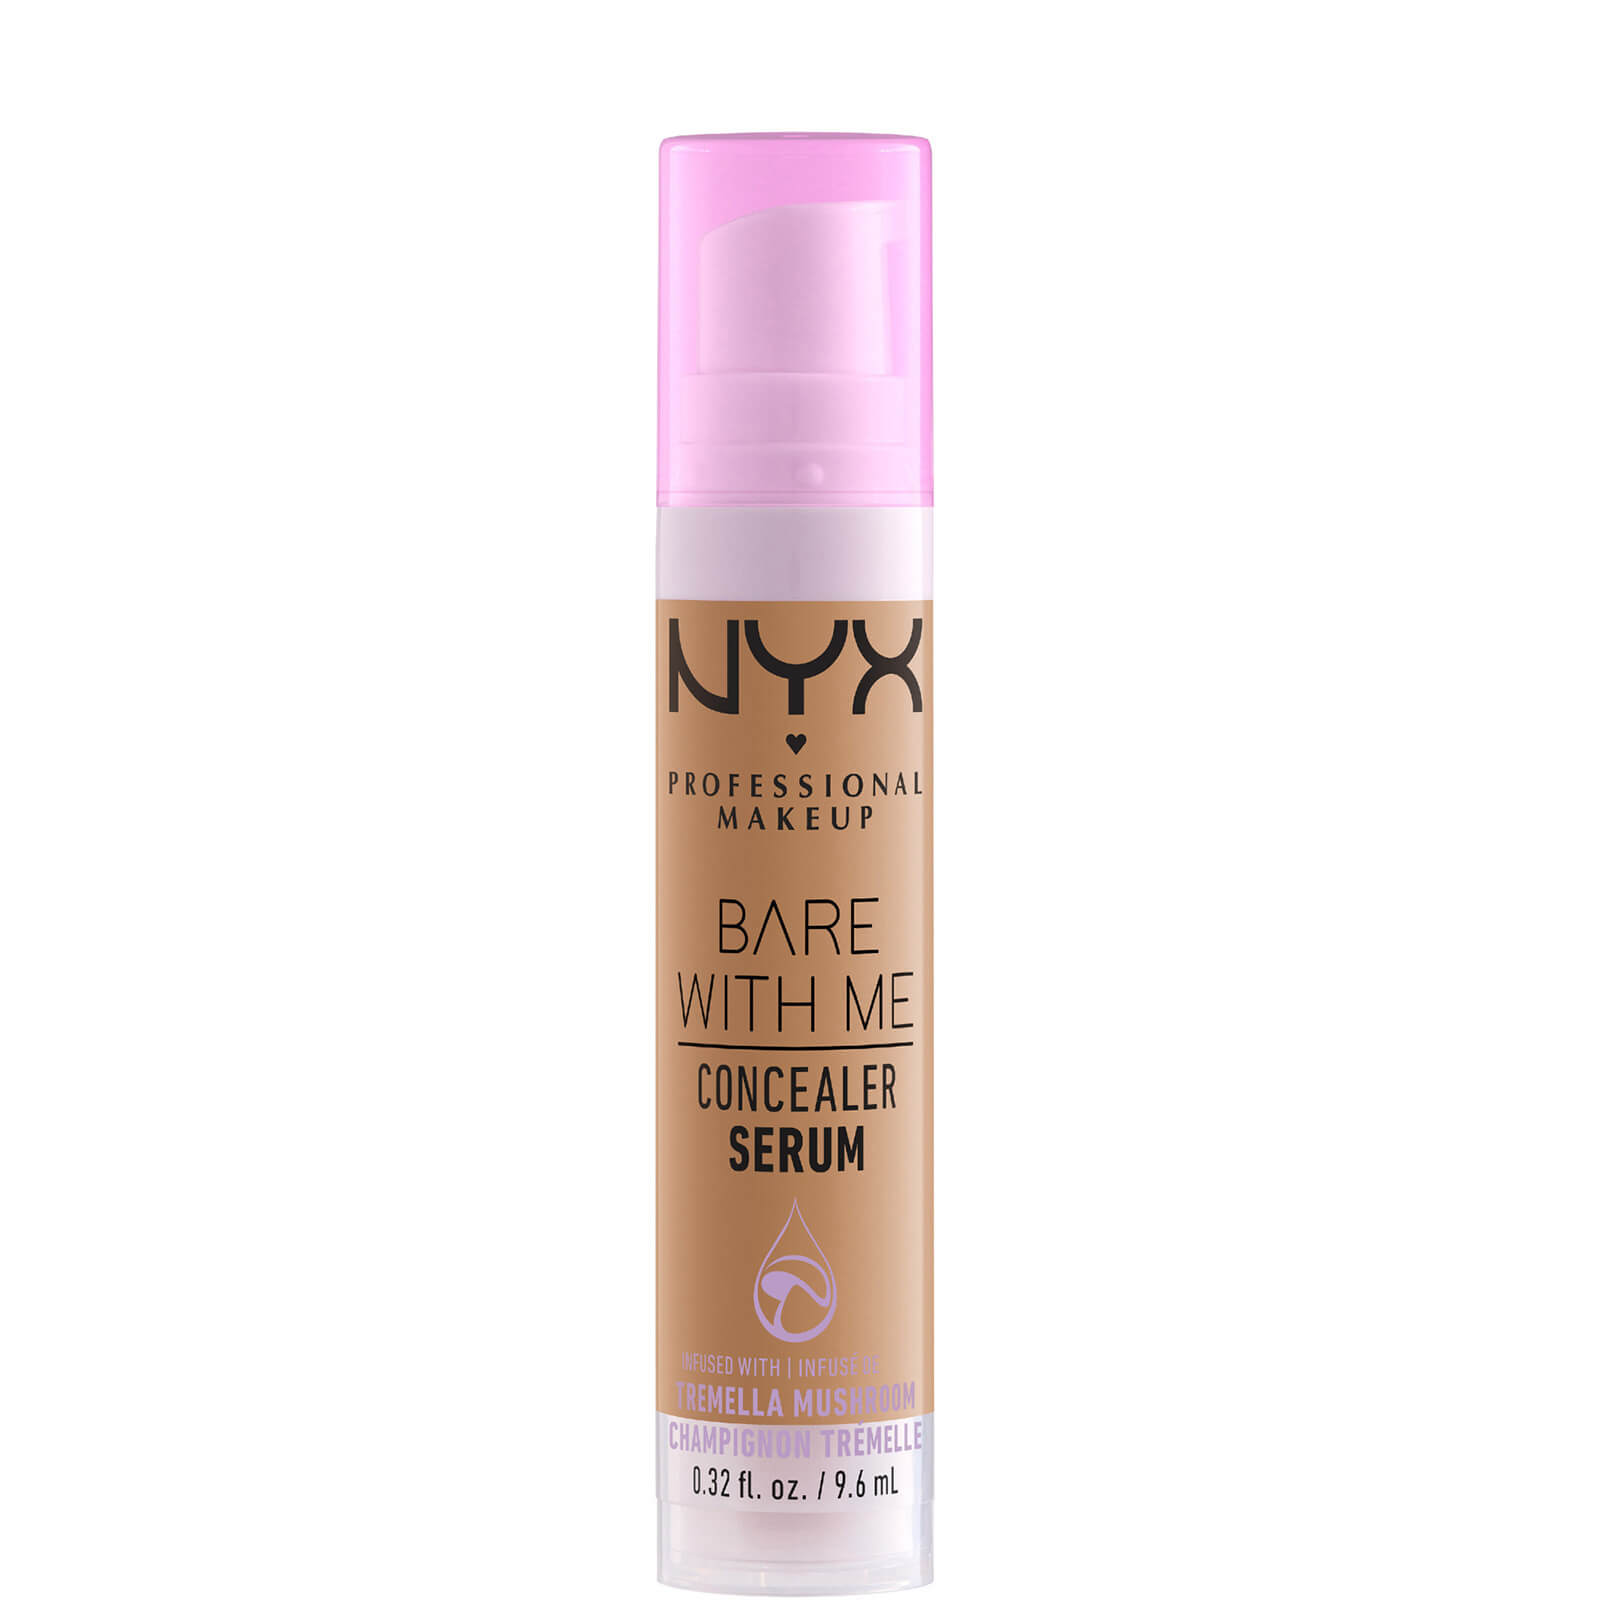 Image of NYX Professional Makeup Bare With Me Concealer Serum 9.6ml (Various Shades) - Sand